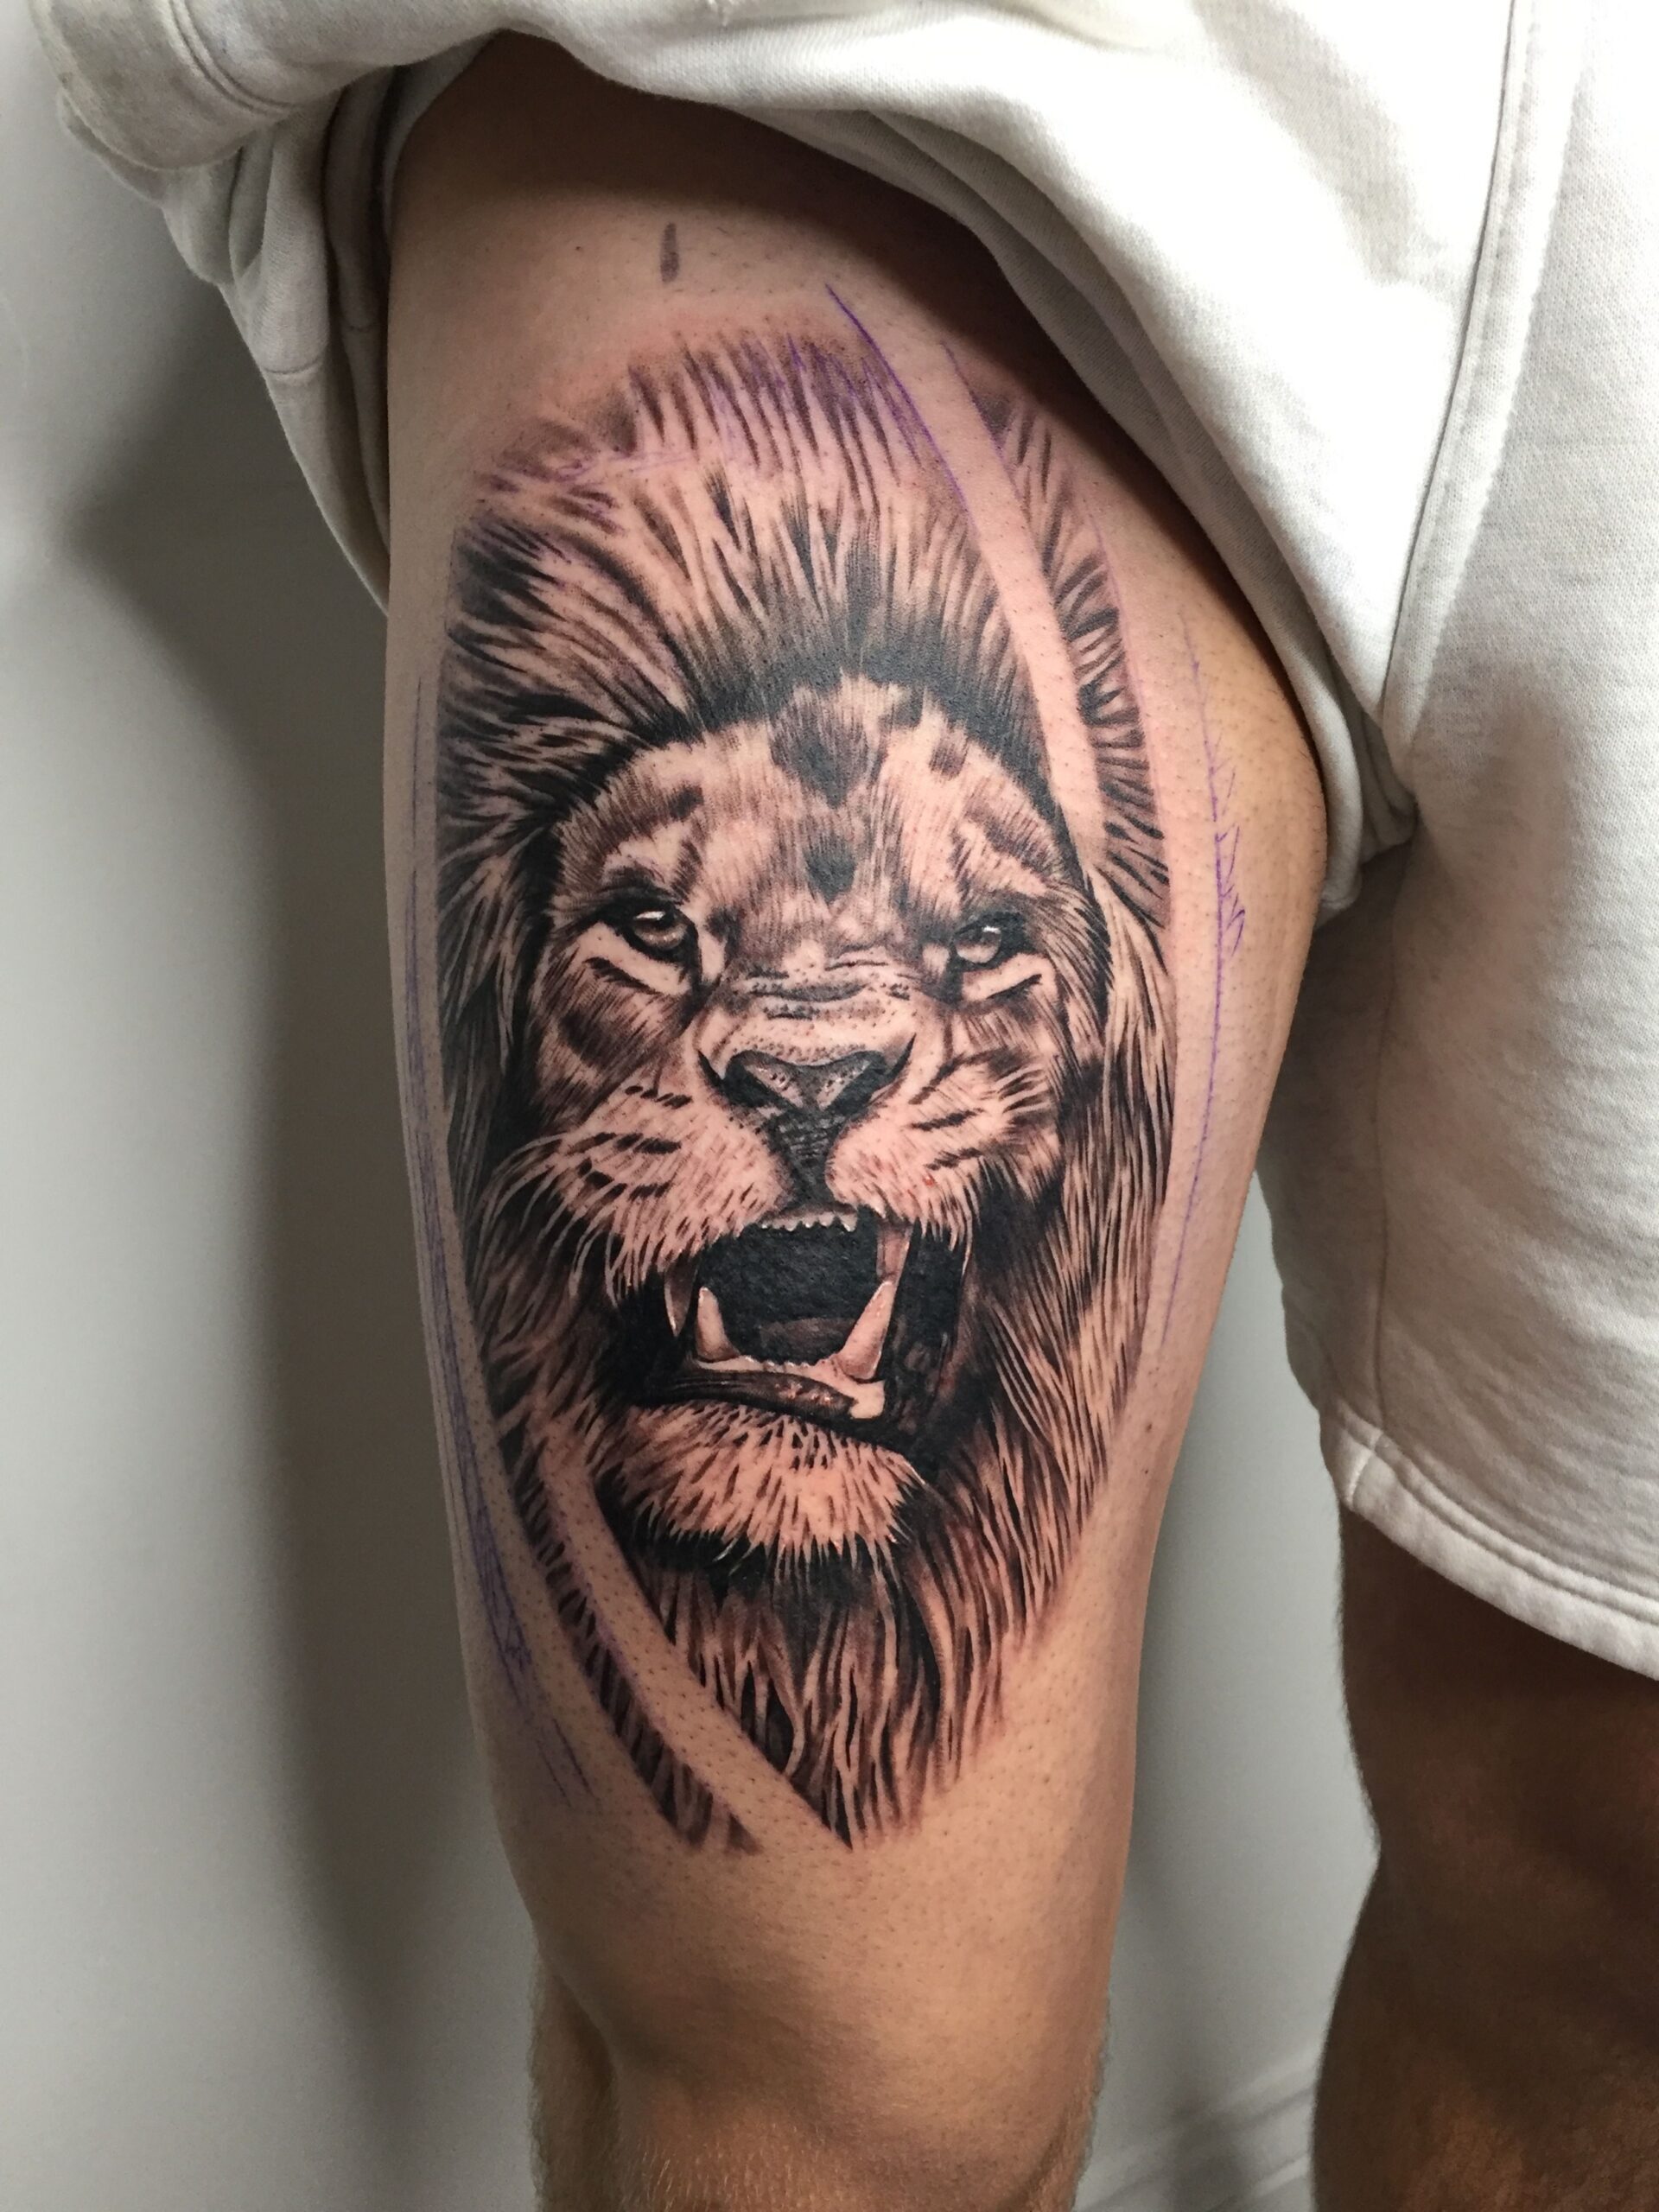 150 Best Leg Tattoos For Men To Upgrade Your Style Instantly